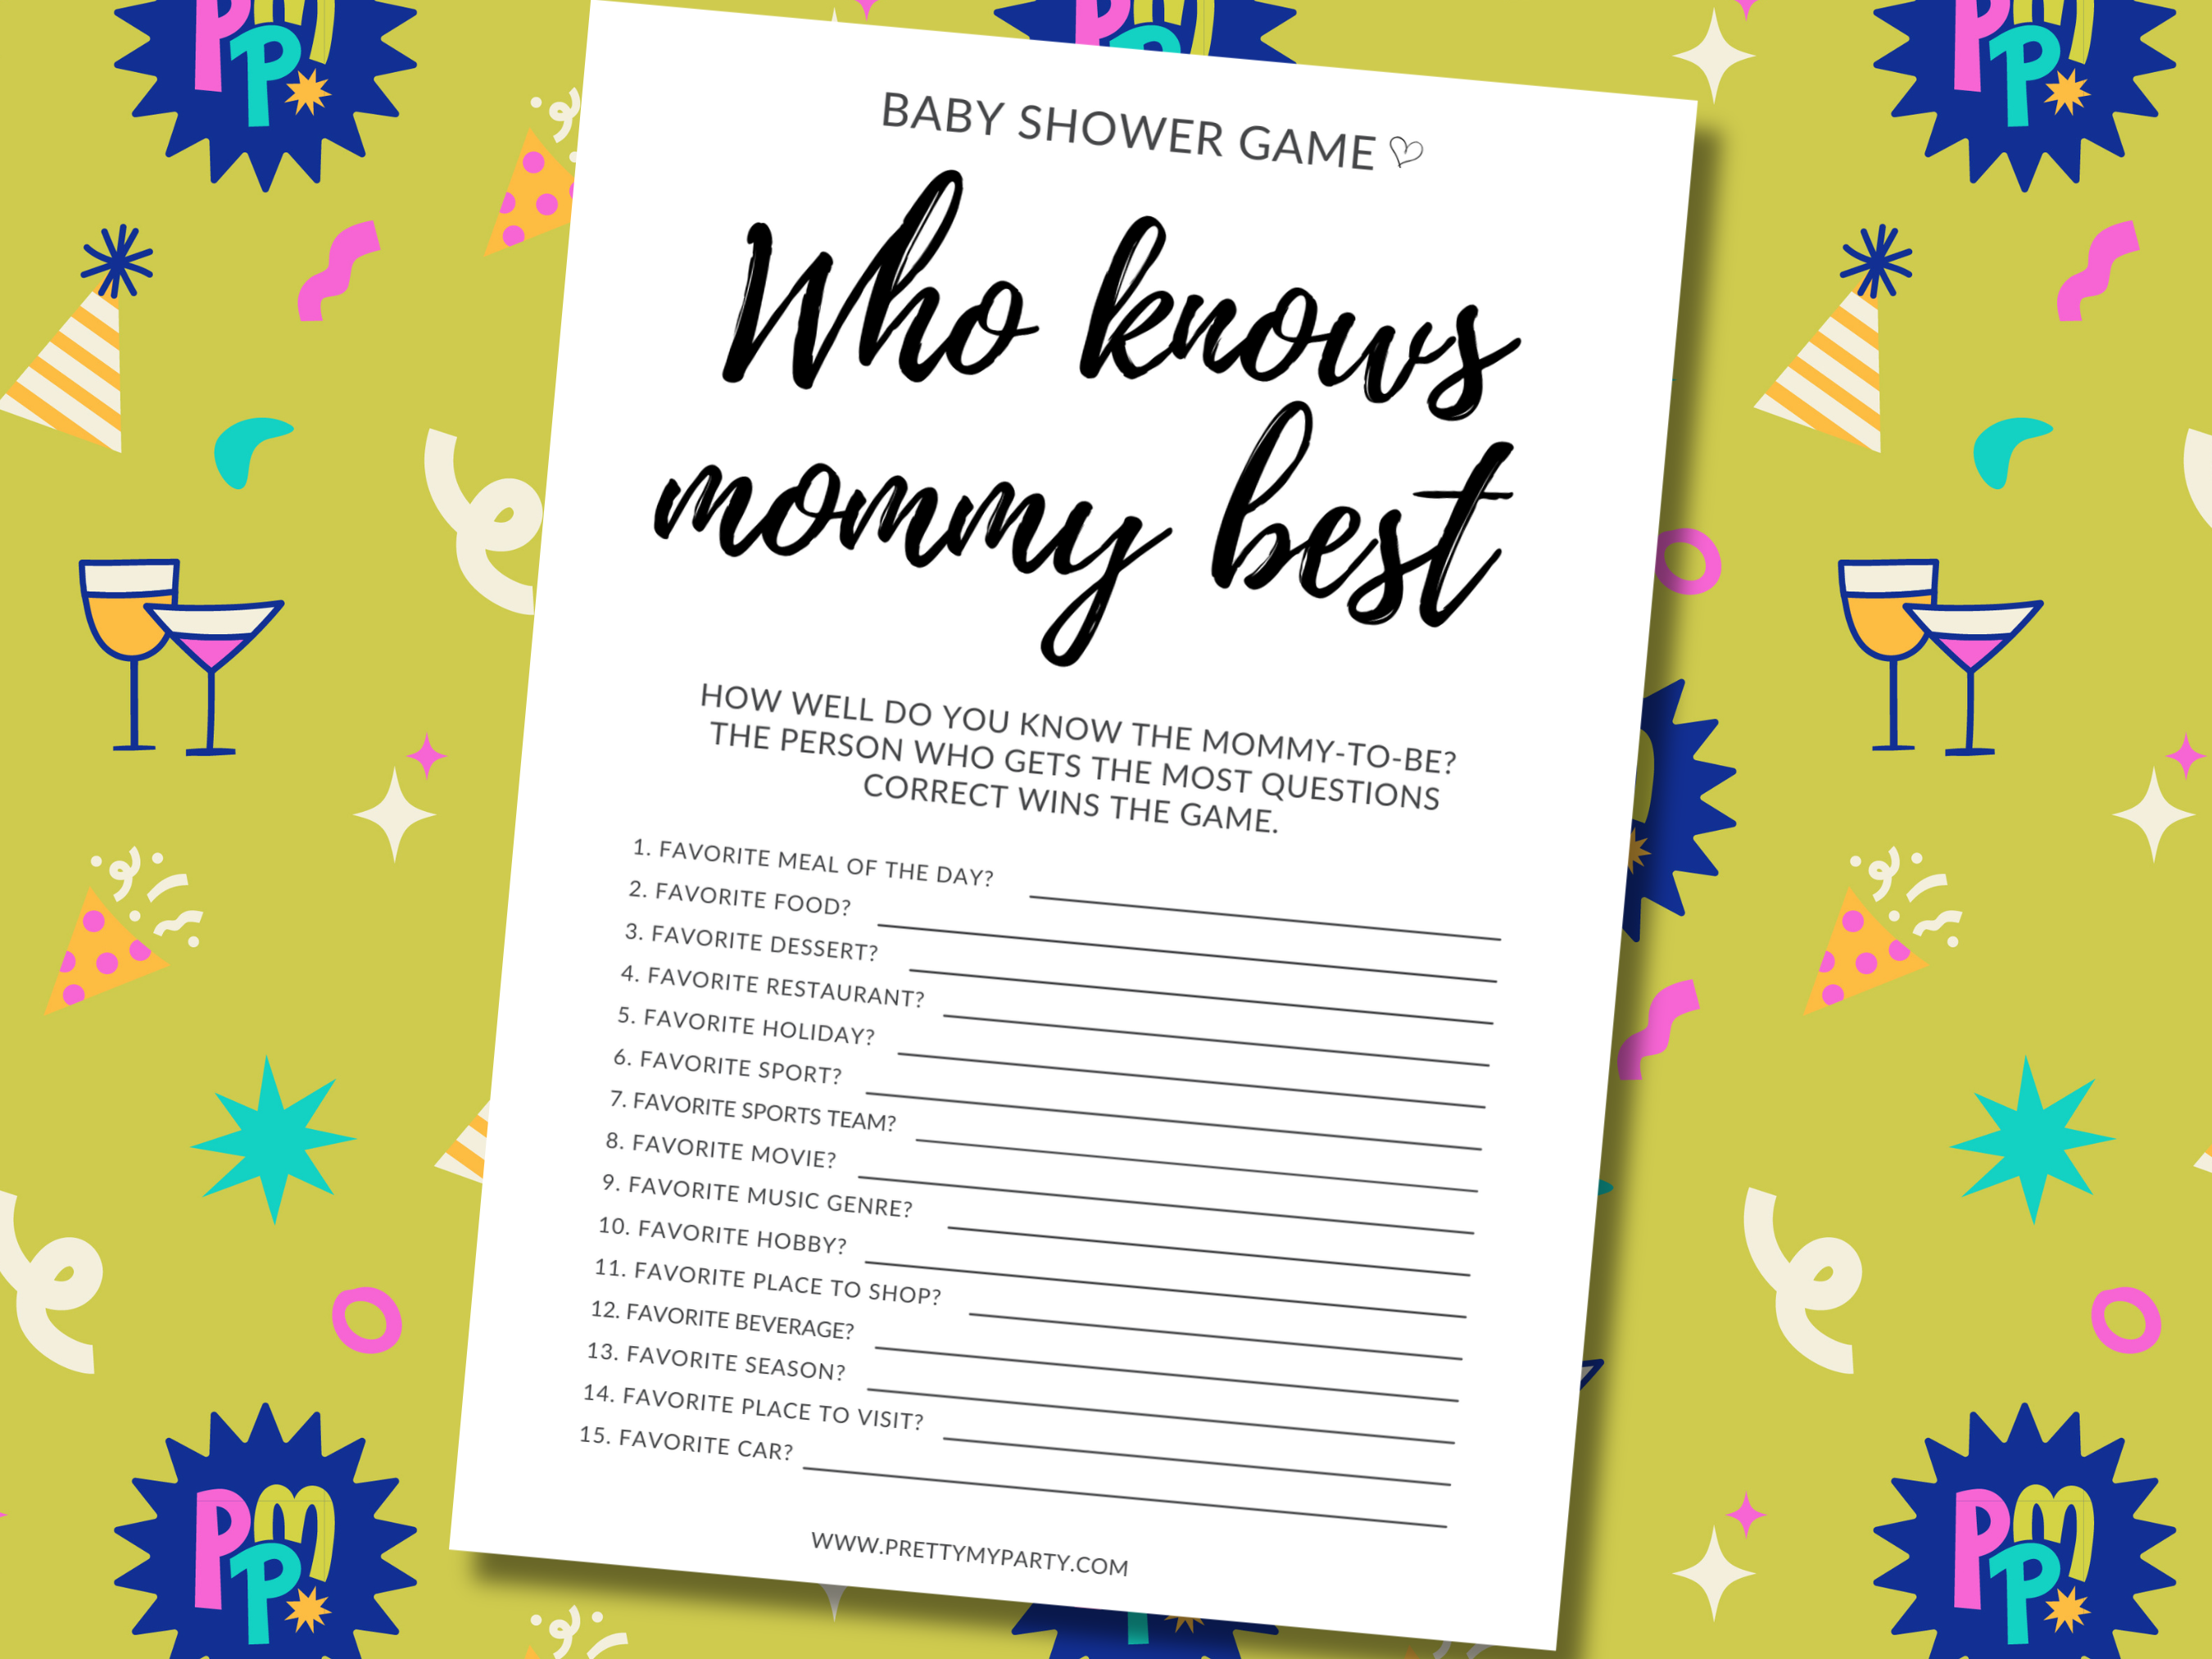 Who Knows Mommy Best Free Printable Baby Shower Game on Pretty My Party